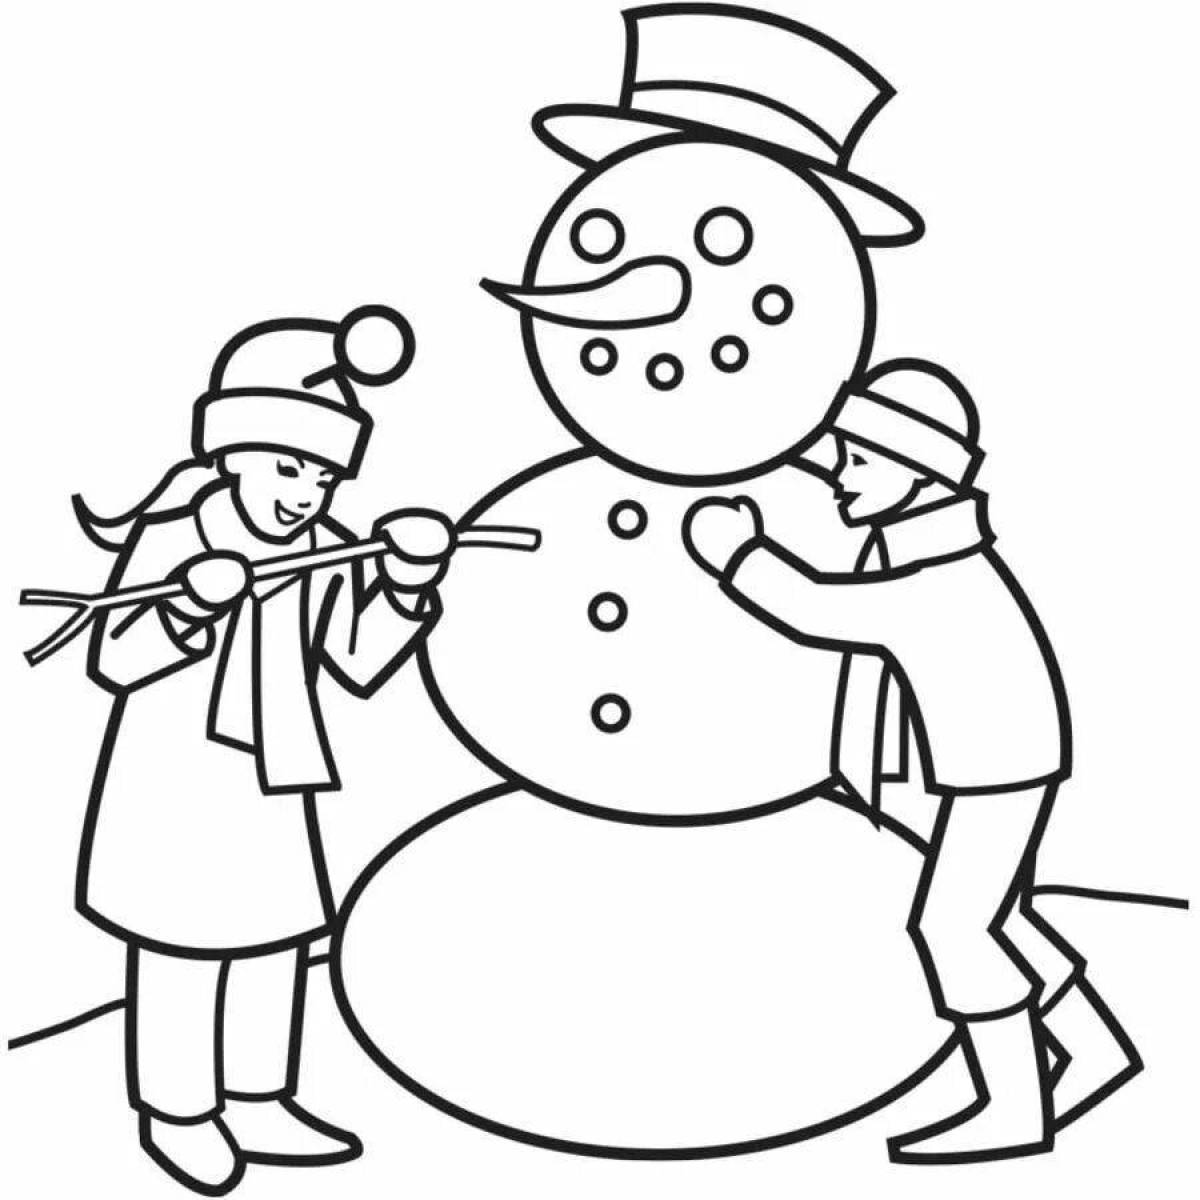 Live coloring snowman for kids